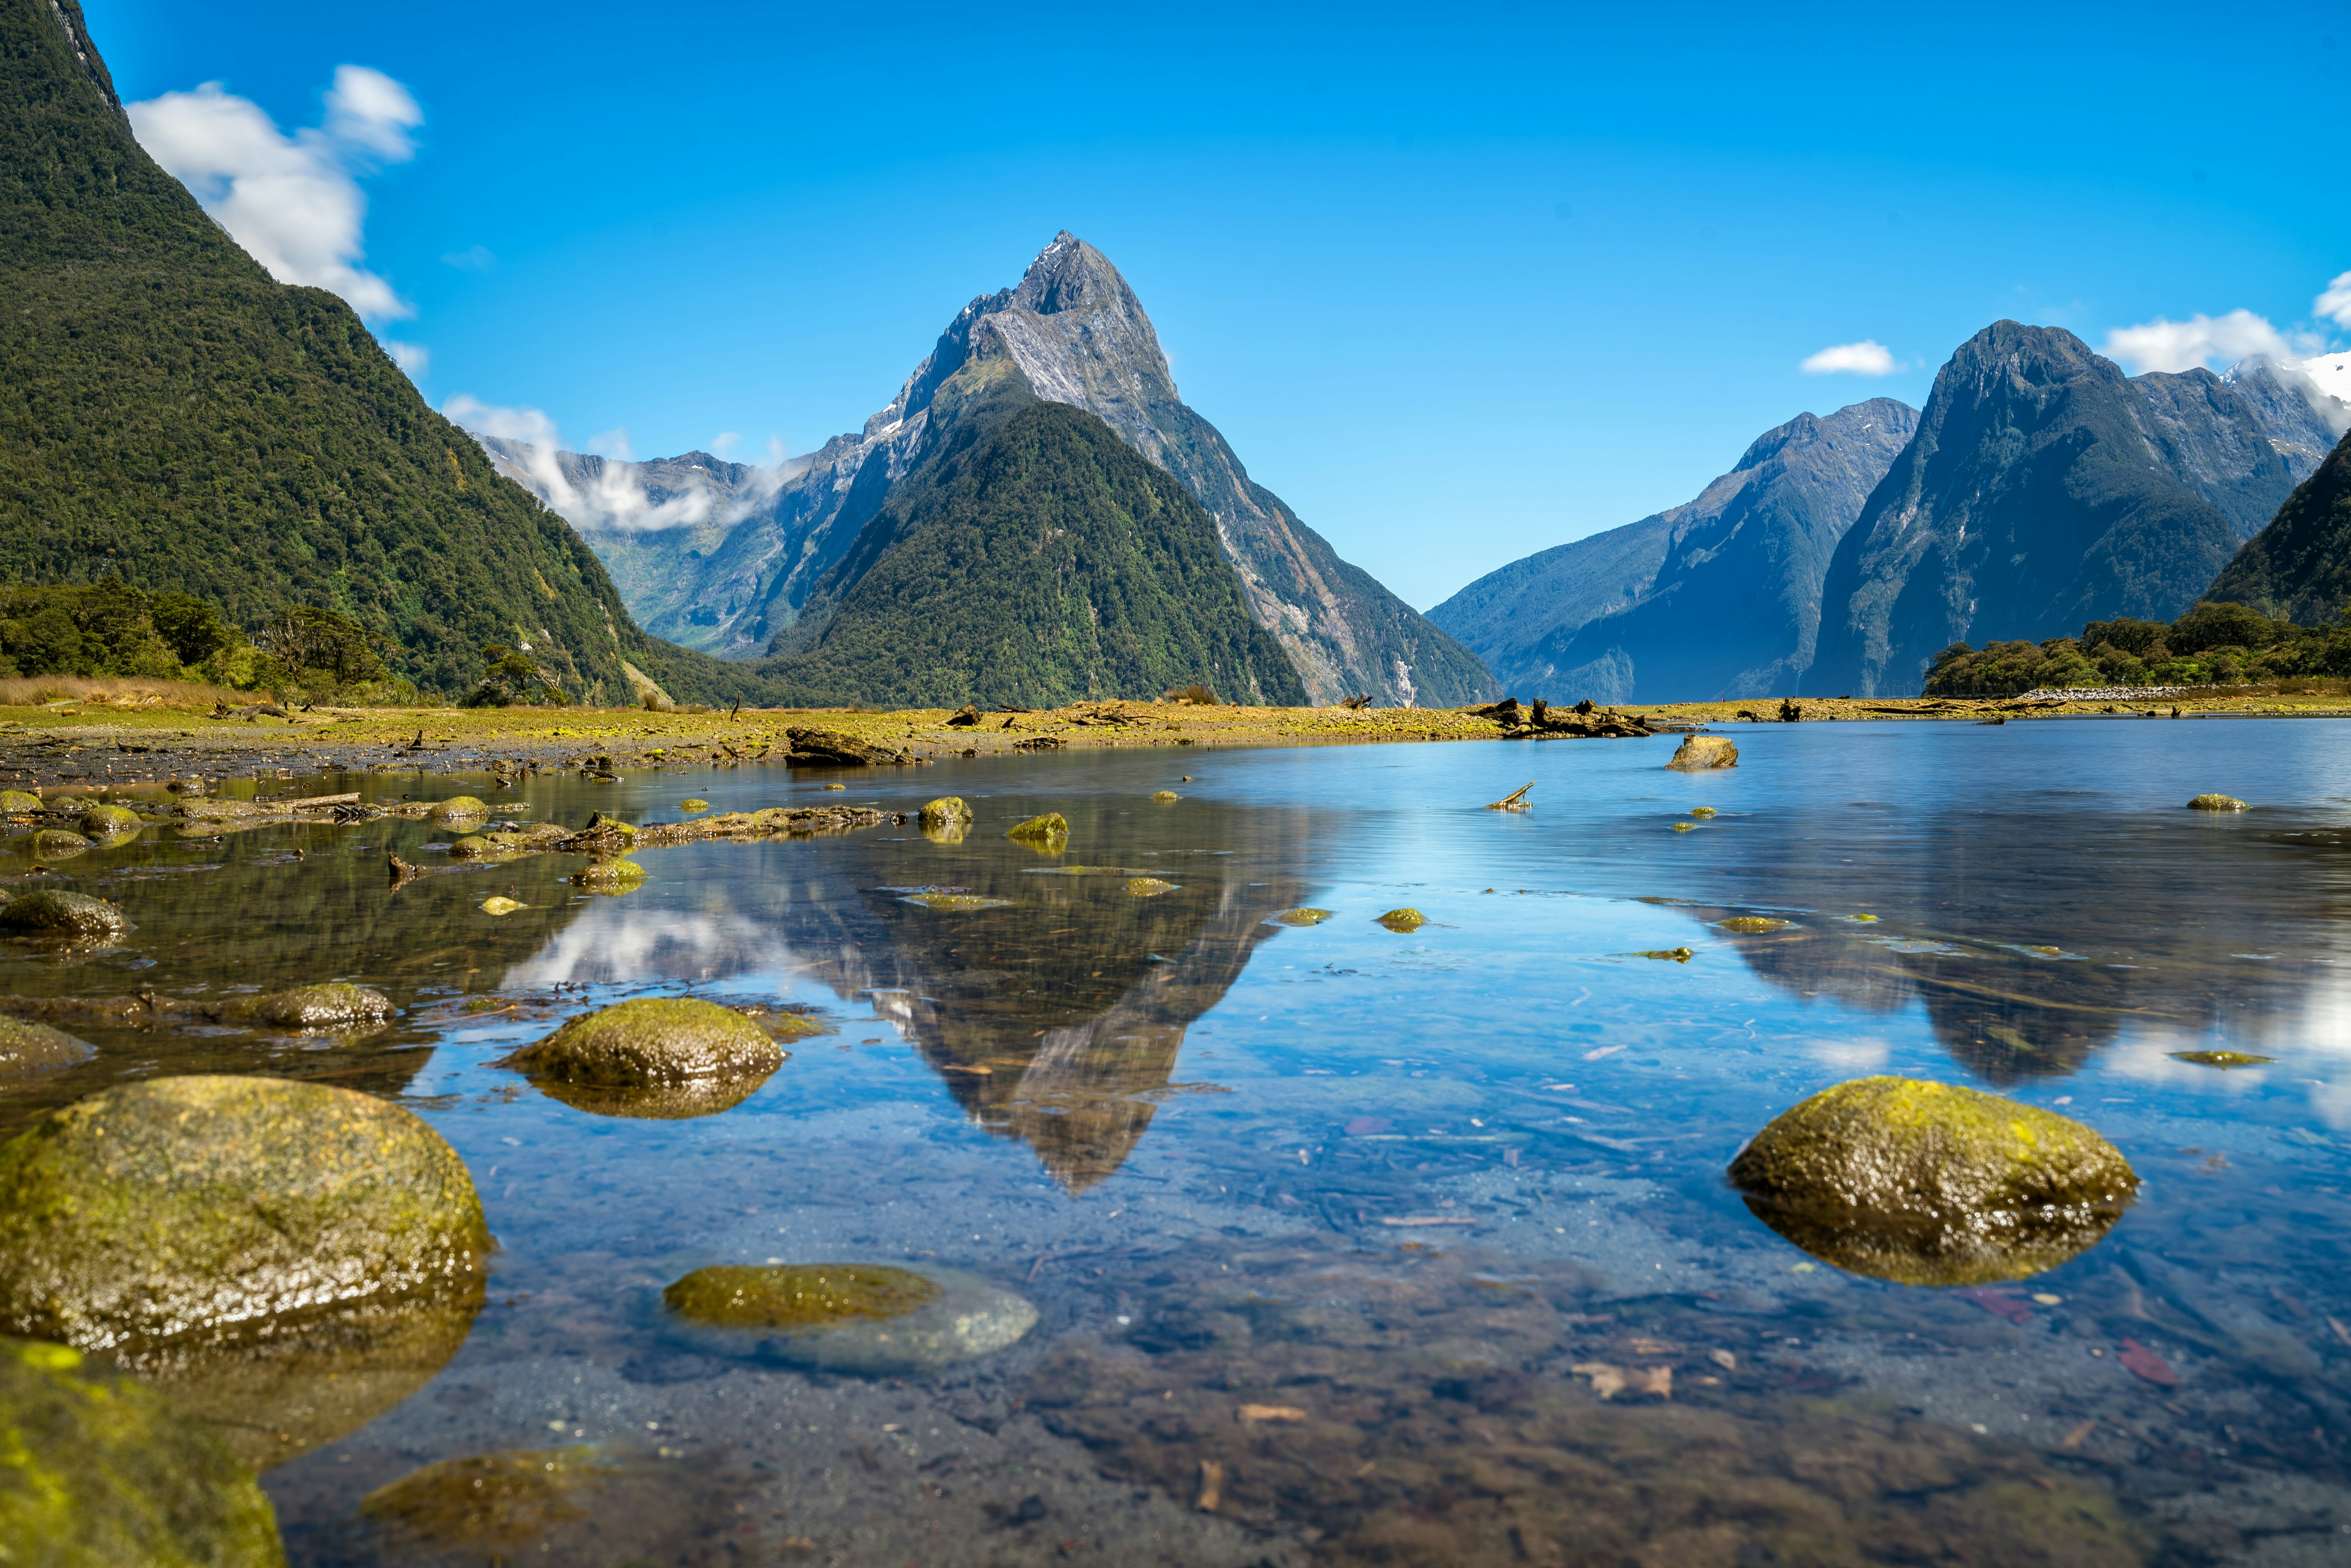 Lake in New Zealand with greenery all around and mountains in the background